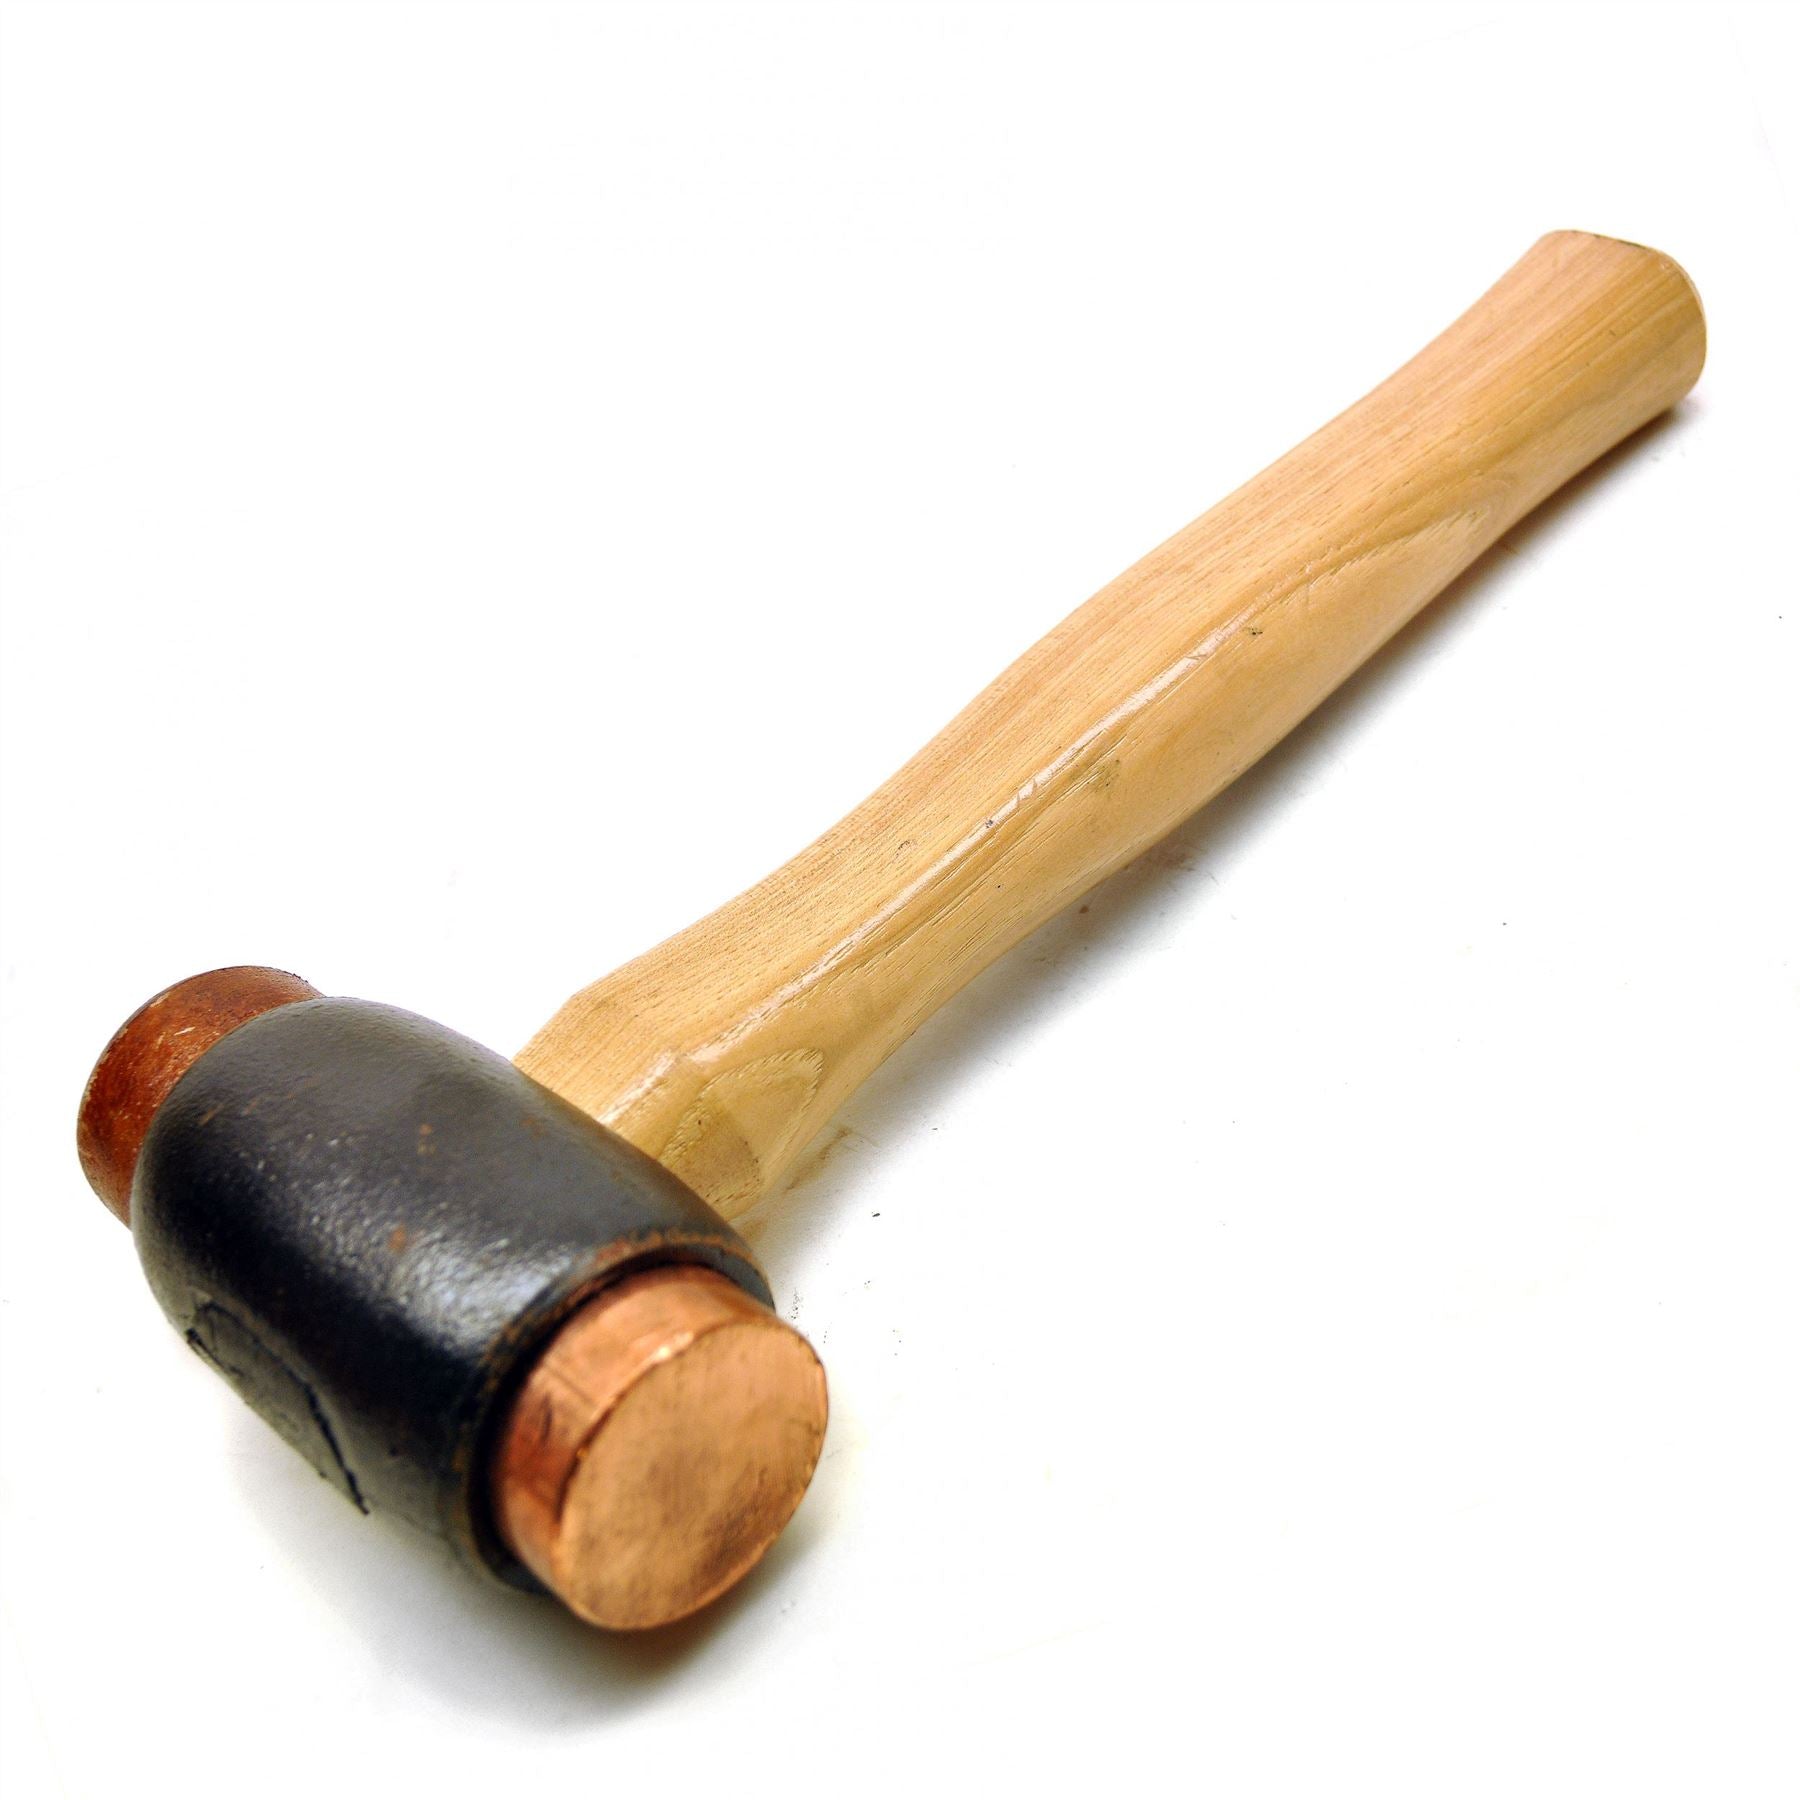 Thor No 3 Copper and Rawhide / Hide Faced Hammer / Mallet Dead Blow 3lb TE398